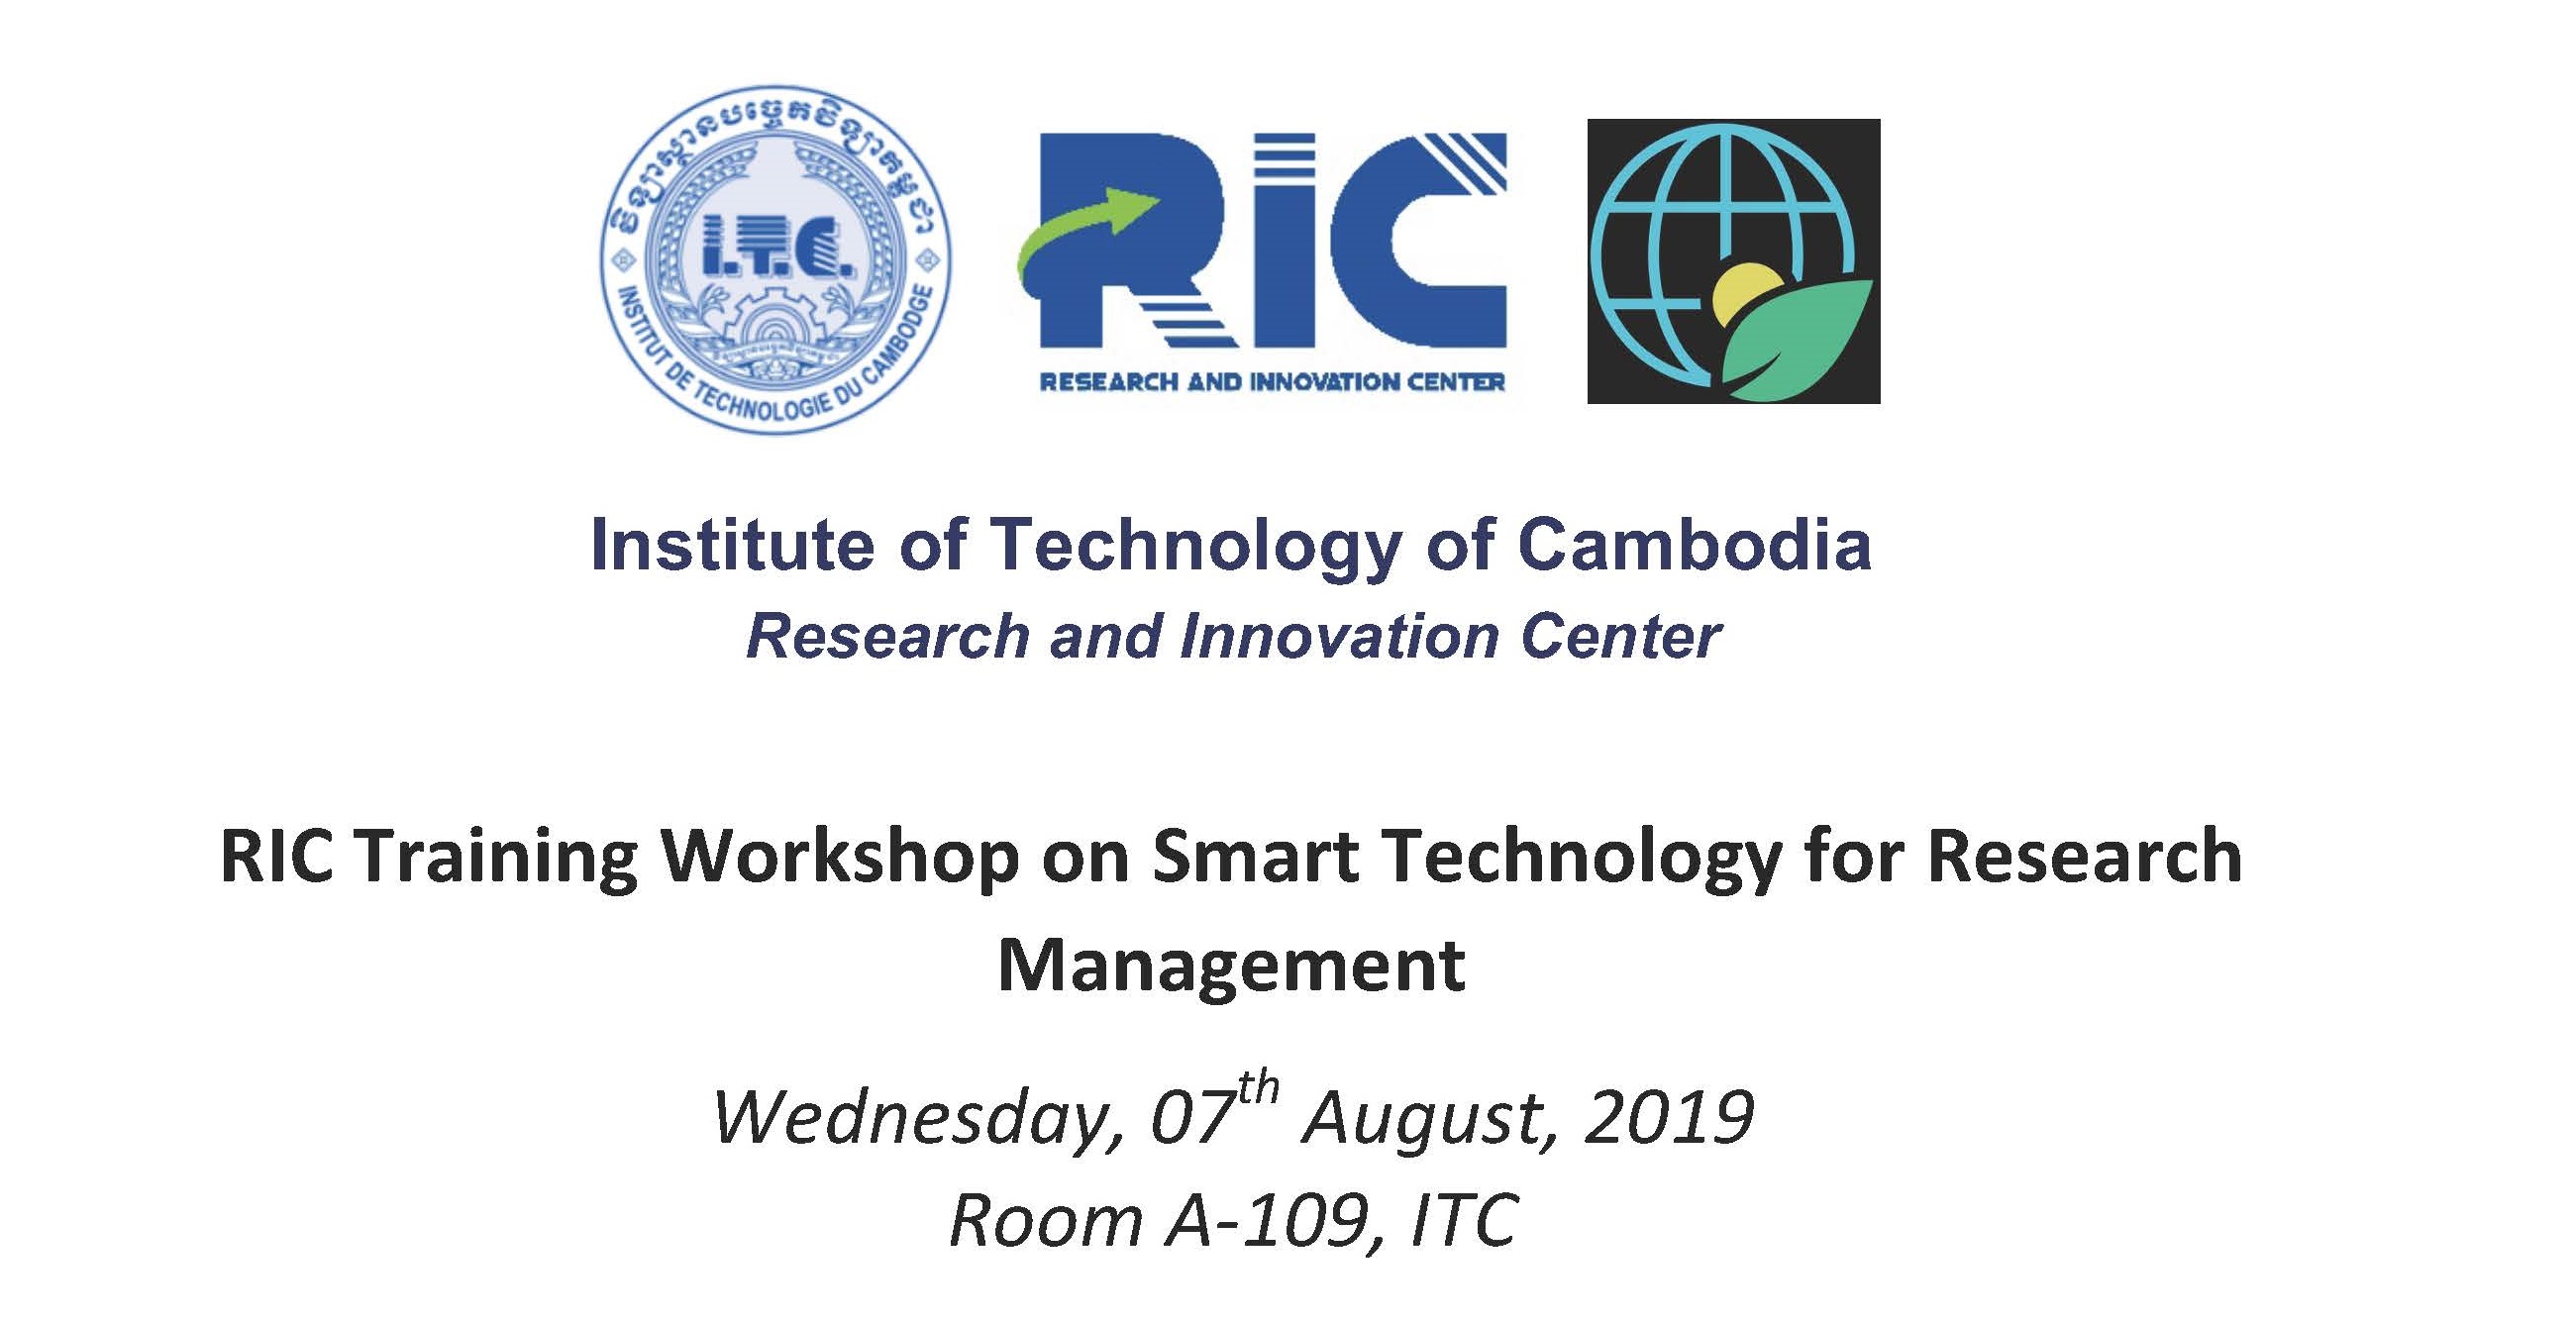 RIC Training Workshop on Smart Technology for Research Management, 07th August, 2019